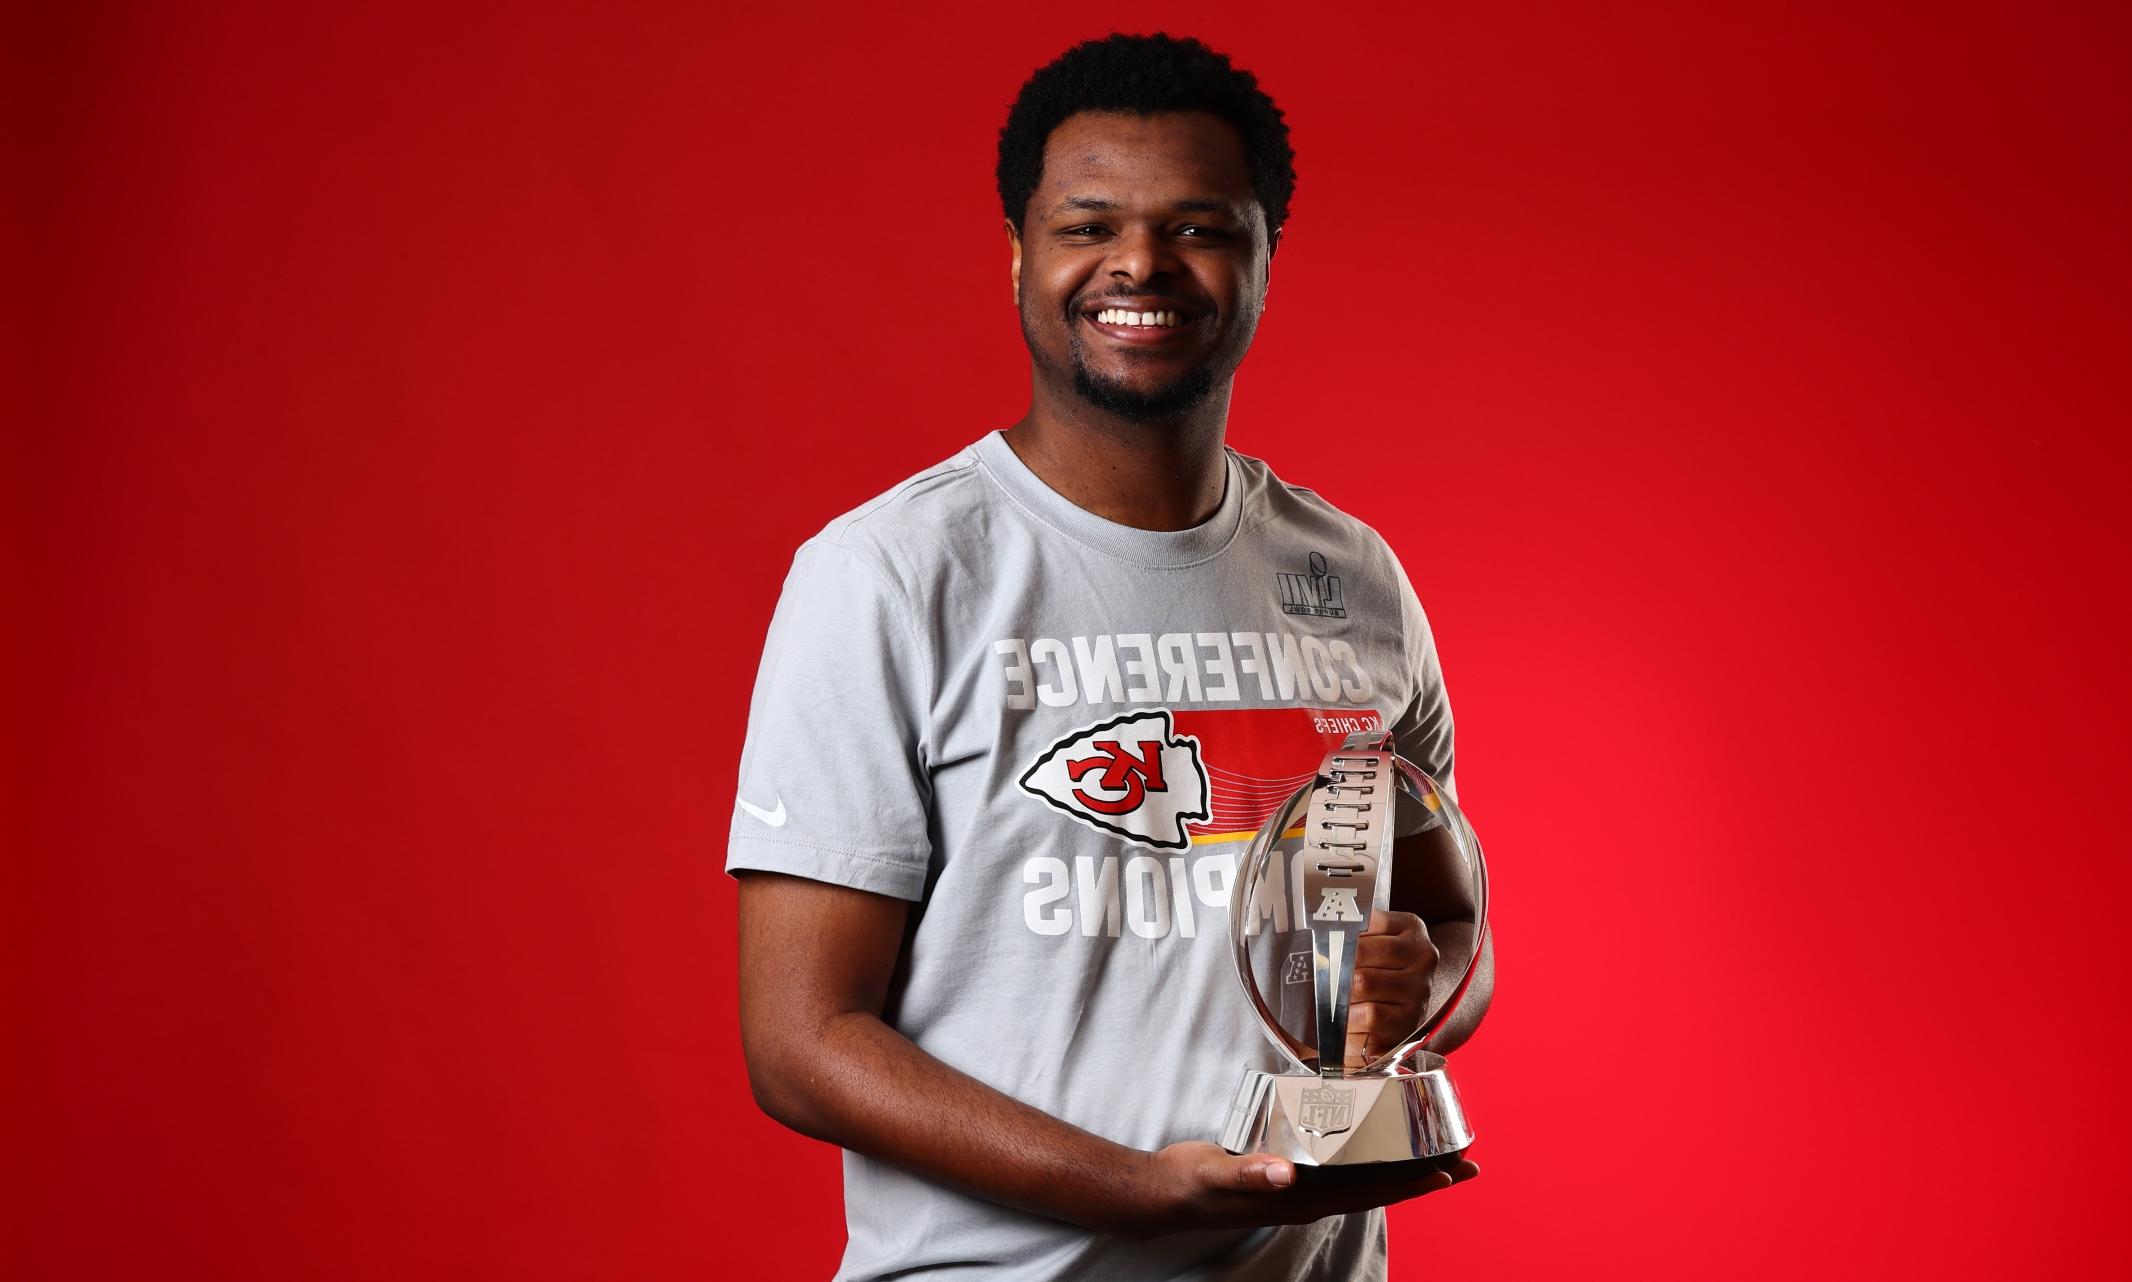 Ishmael Shumate holds the AFC Championship trophy smiling against a red backdrop